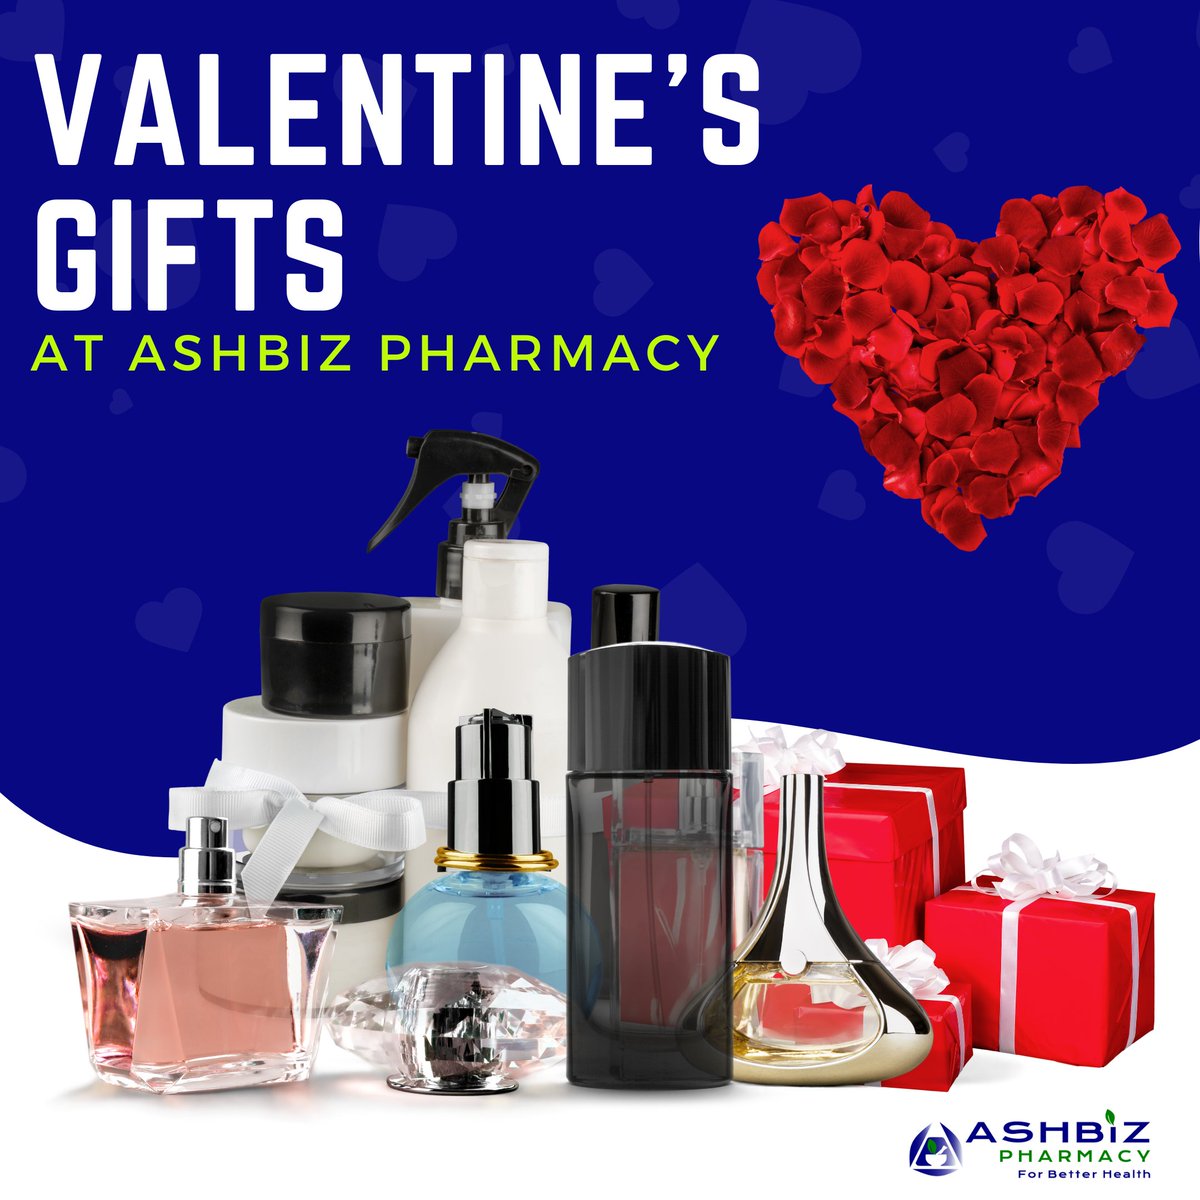 Celebrate the season of love with thoughtful and heart-warming gifts from AshBiz Pharmacy.
From romantic gestures to wellness treats, find the perfect gift to make this Valentine's Day unforgettable.

#ValentinesDay #GiftIdeasJamaica #AshBizPharmacy #giftsforhim #giftsforher